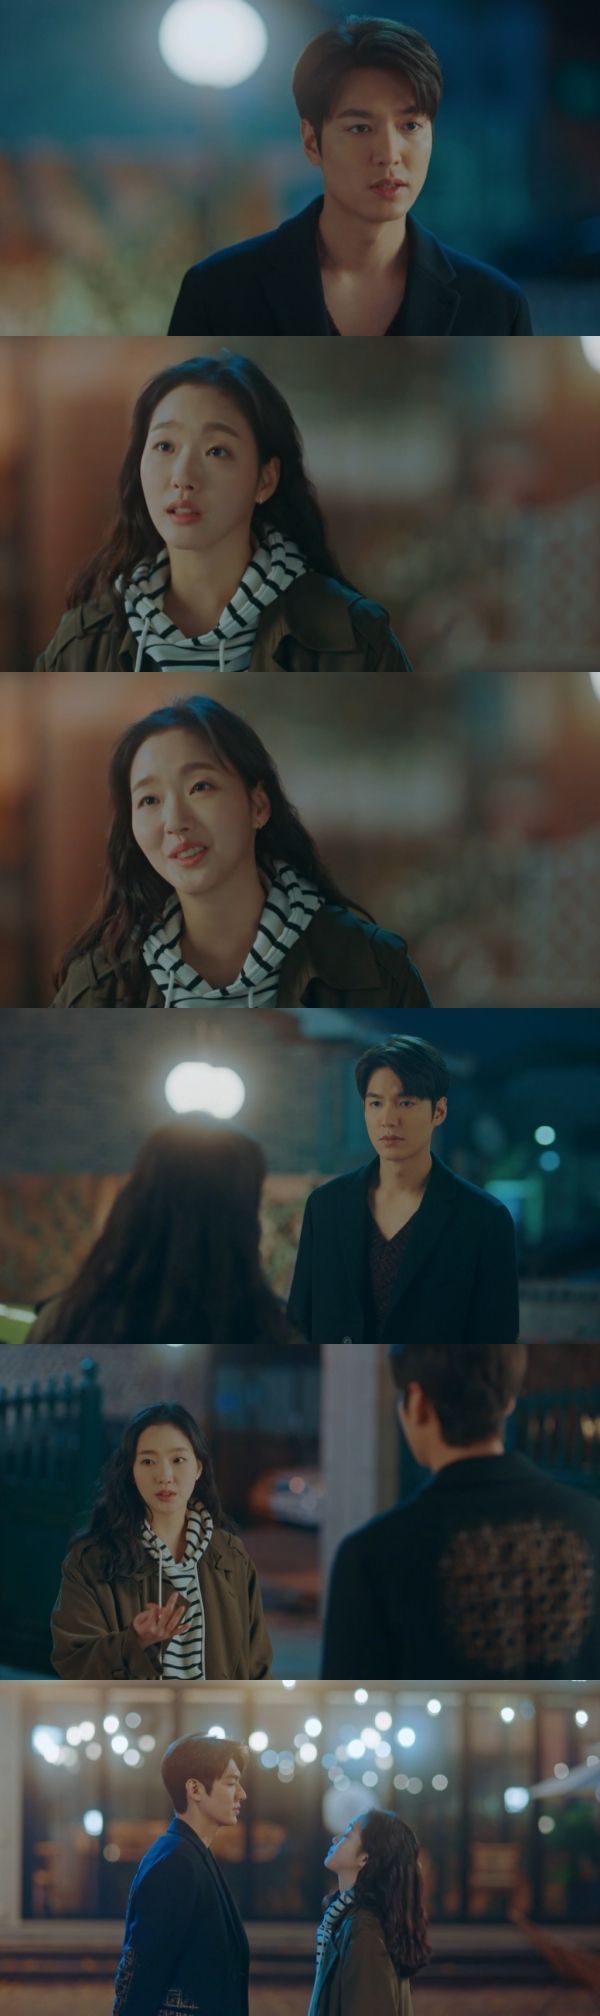 Lee Min-ho heads to Kim Go-eunLee Min-ho, who went to parallel World, hovered around Jung Tae-eul (Kim Go-eun) in SBSs Golden Globe Drama The King - Eternal Monarch (played by Kim Eun-sook and directed by Baek Sang-hoon, Jung Ji-hyun) broadcast on the 18th.On the day of the broadcast, Jung Tae-eul left the horse and left him with a note saying, I left it to me, it would be sold quite expensive.Lee asked Jung Tae-eun, I do not want you to give my Maximus 4m by 4m in width of your yard.When are you going to go, to your World, Jeong said, and Egon added, I put it off to the first time. I like being like this with you.I will take it until the DNA results come out. Animals are innocent and Kim can be guilty. It would be better to stay calm.Nevertheless, Igon said, Thank you. I was less lonely because you were somewhere. 25 years. I saw your World history. The two history changed from Sohyeon Taxa.Your World has grown at a high speed with compressive industrialization since the war and division, it was amazing, he added.Im serializing web novels on the Internet. Did you write that?Why do not you believe me once, said Jeong Tae-eul, you have to believe in absurdity. Be calm until DNA results come out.Why do you help me without believing it? I asked, Why am I stranded in your World? I got your ID 25 years ago. I waited a long time.I will welcome you to Empress, she said.Lee Lim (Lee Jung-jin) also went to the parallel World. Lee visited Song Jung-hye (Seo Jeong-yeon) and asked, How will you do it? Will you get saved?